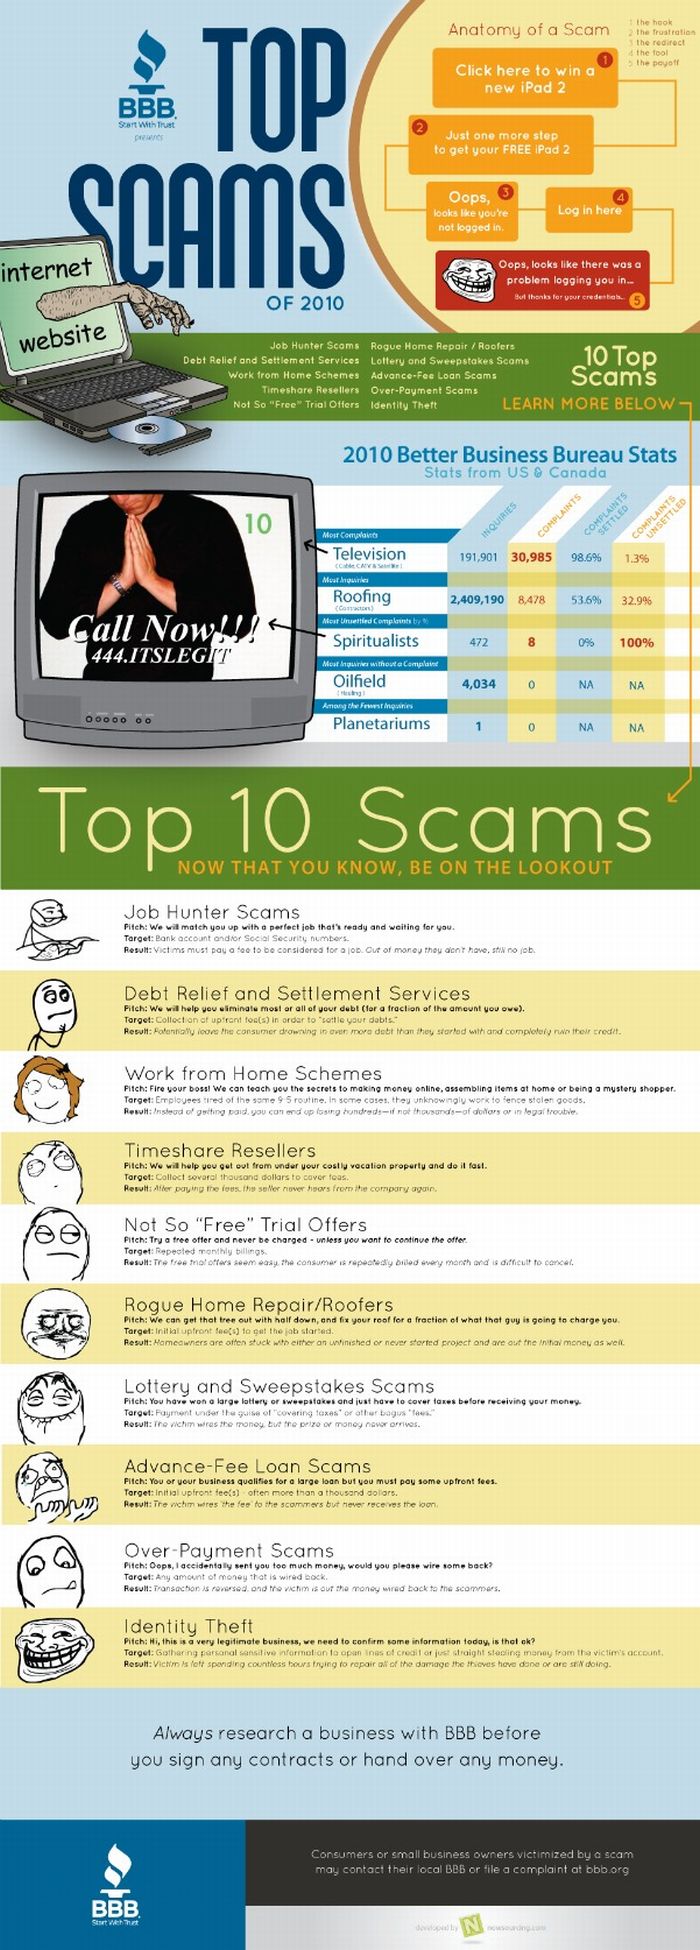 Top Online Scams (infographic)